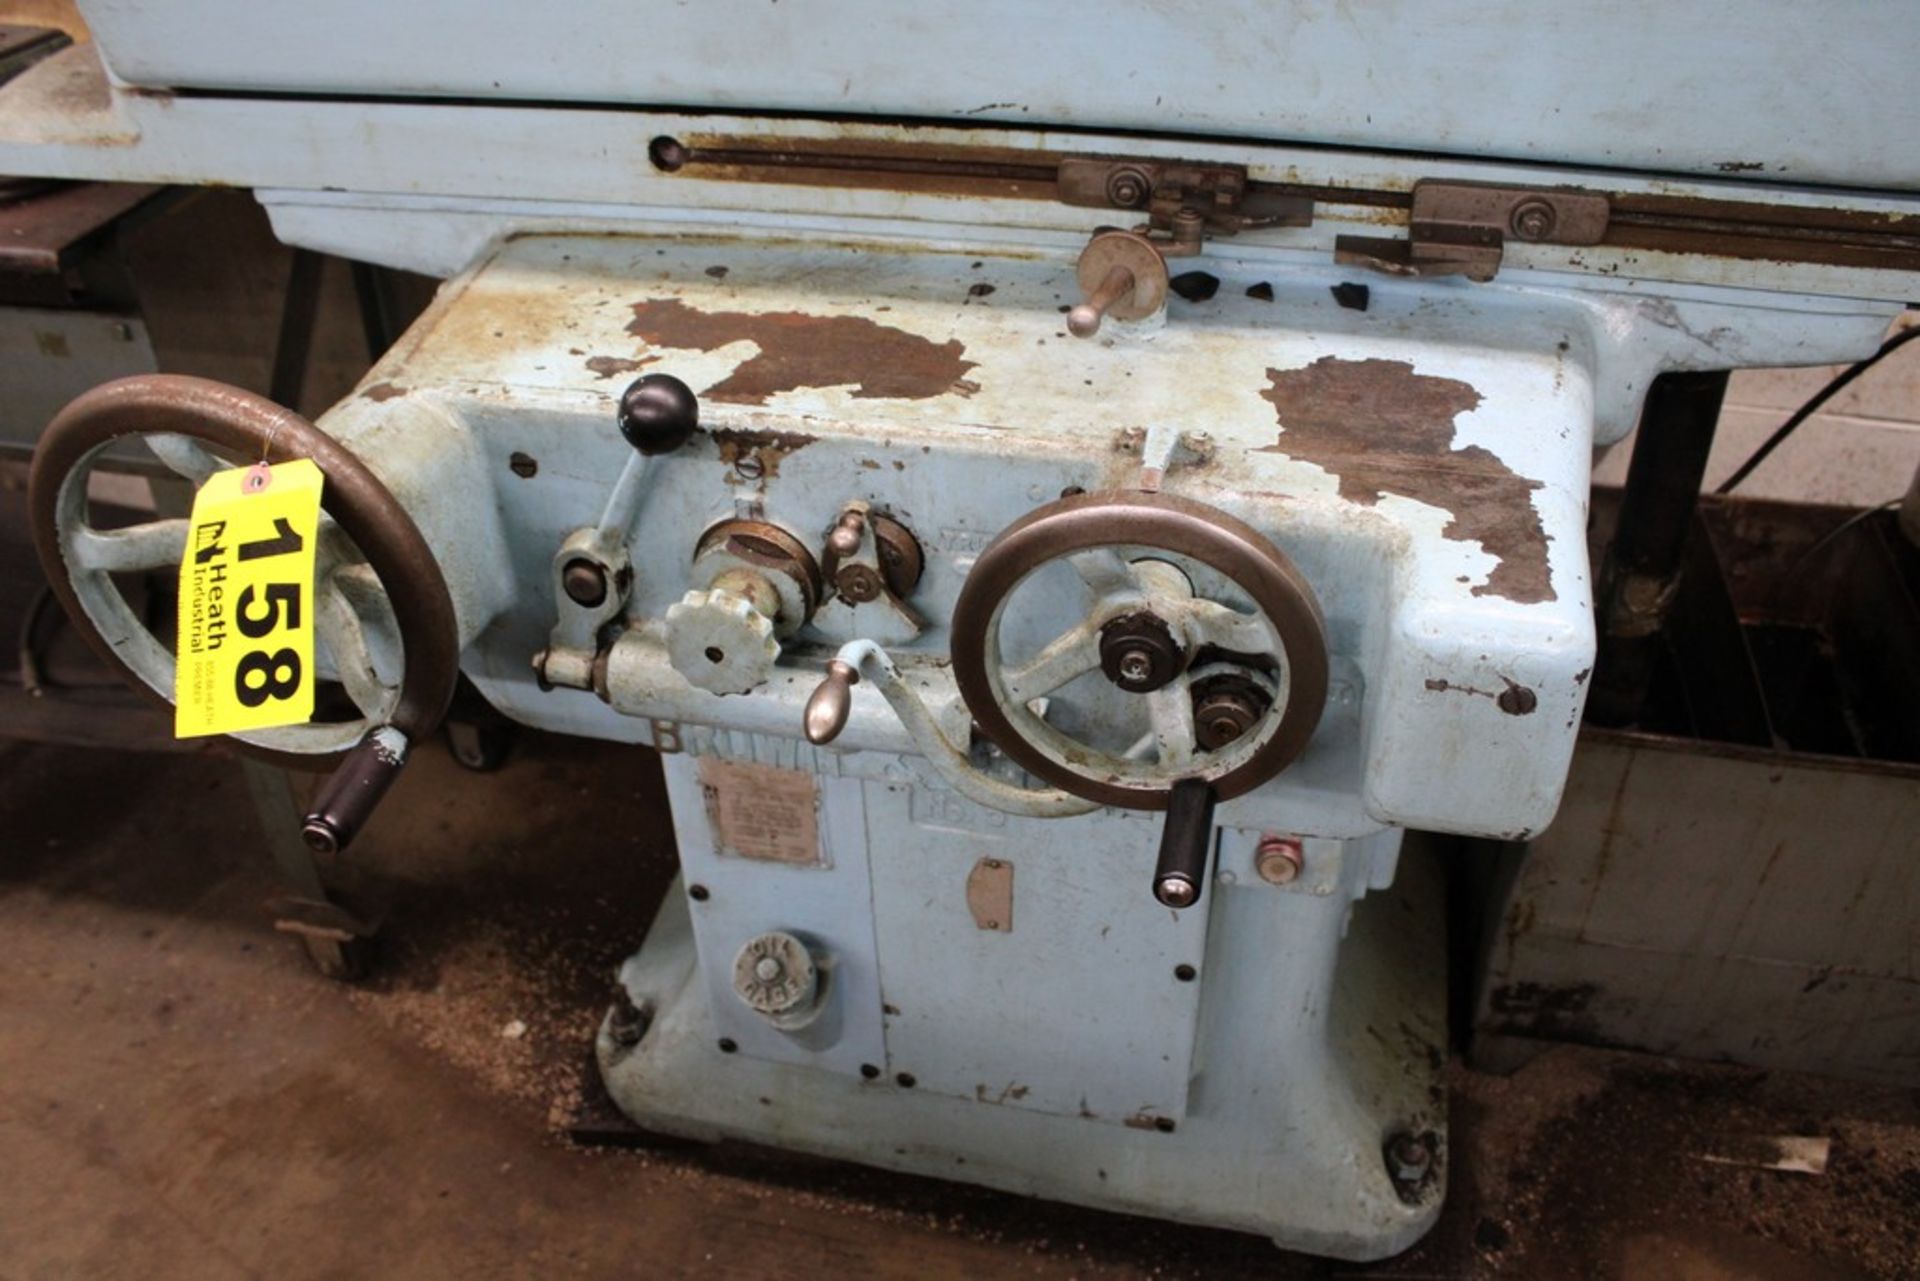 BROWN & SHARPE 8”X24” NO. 5 HYDRAULIC SURFACE GRINDER WITH ELECTRO MAGNETIC CHUCK - Image 2 of 5